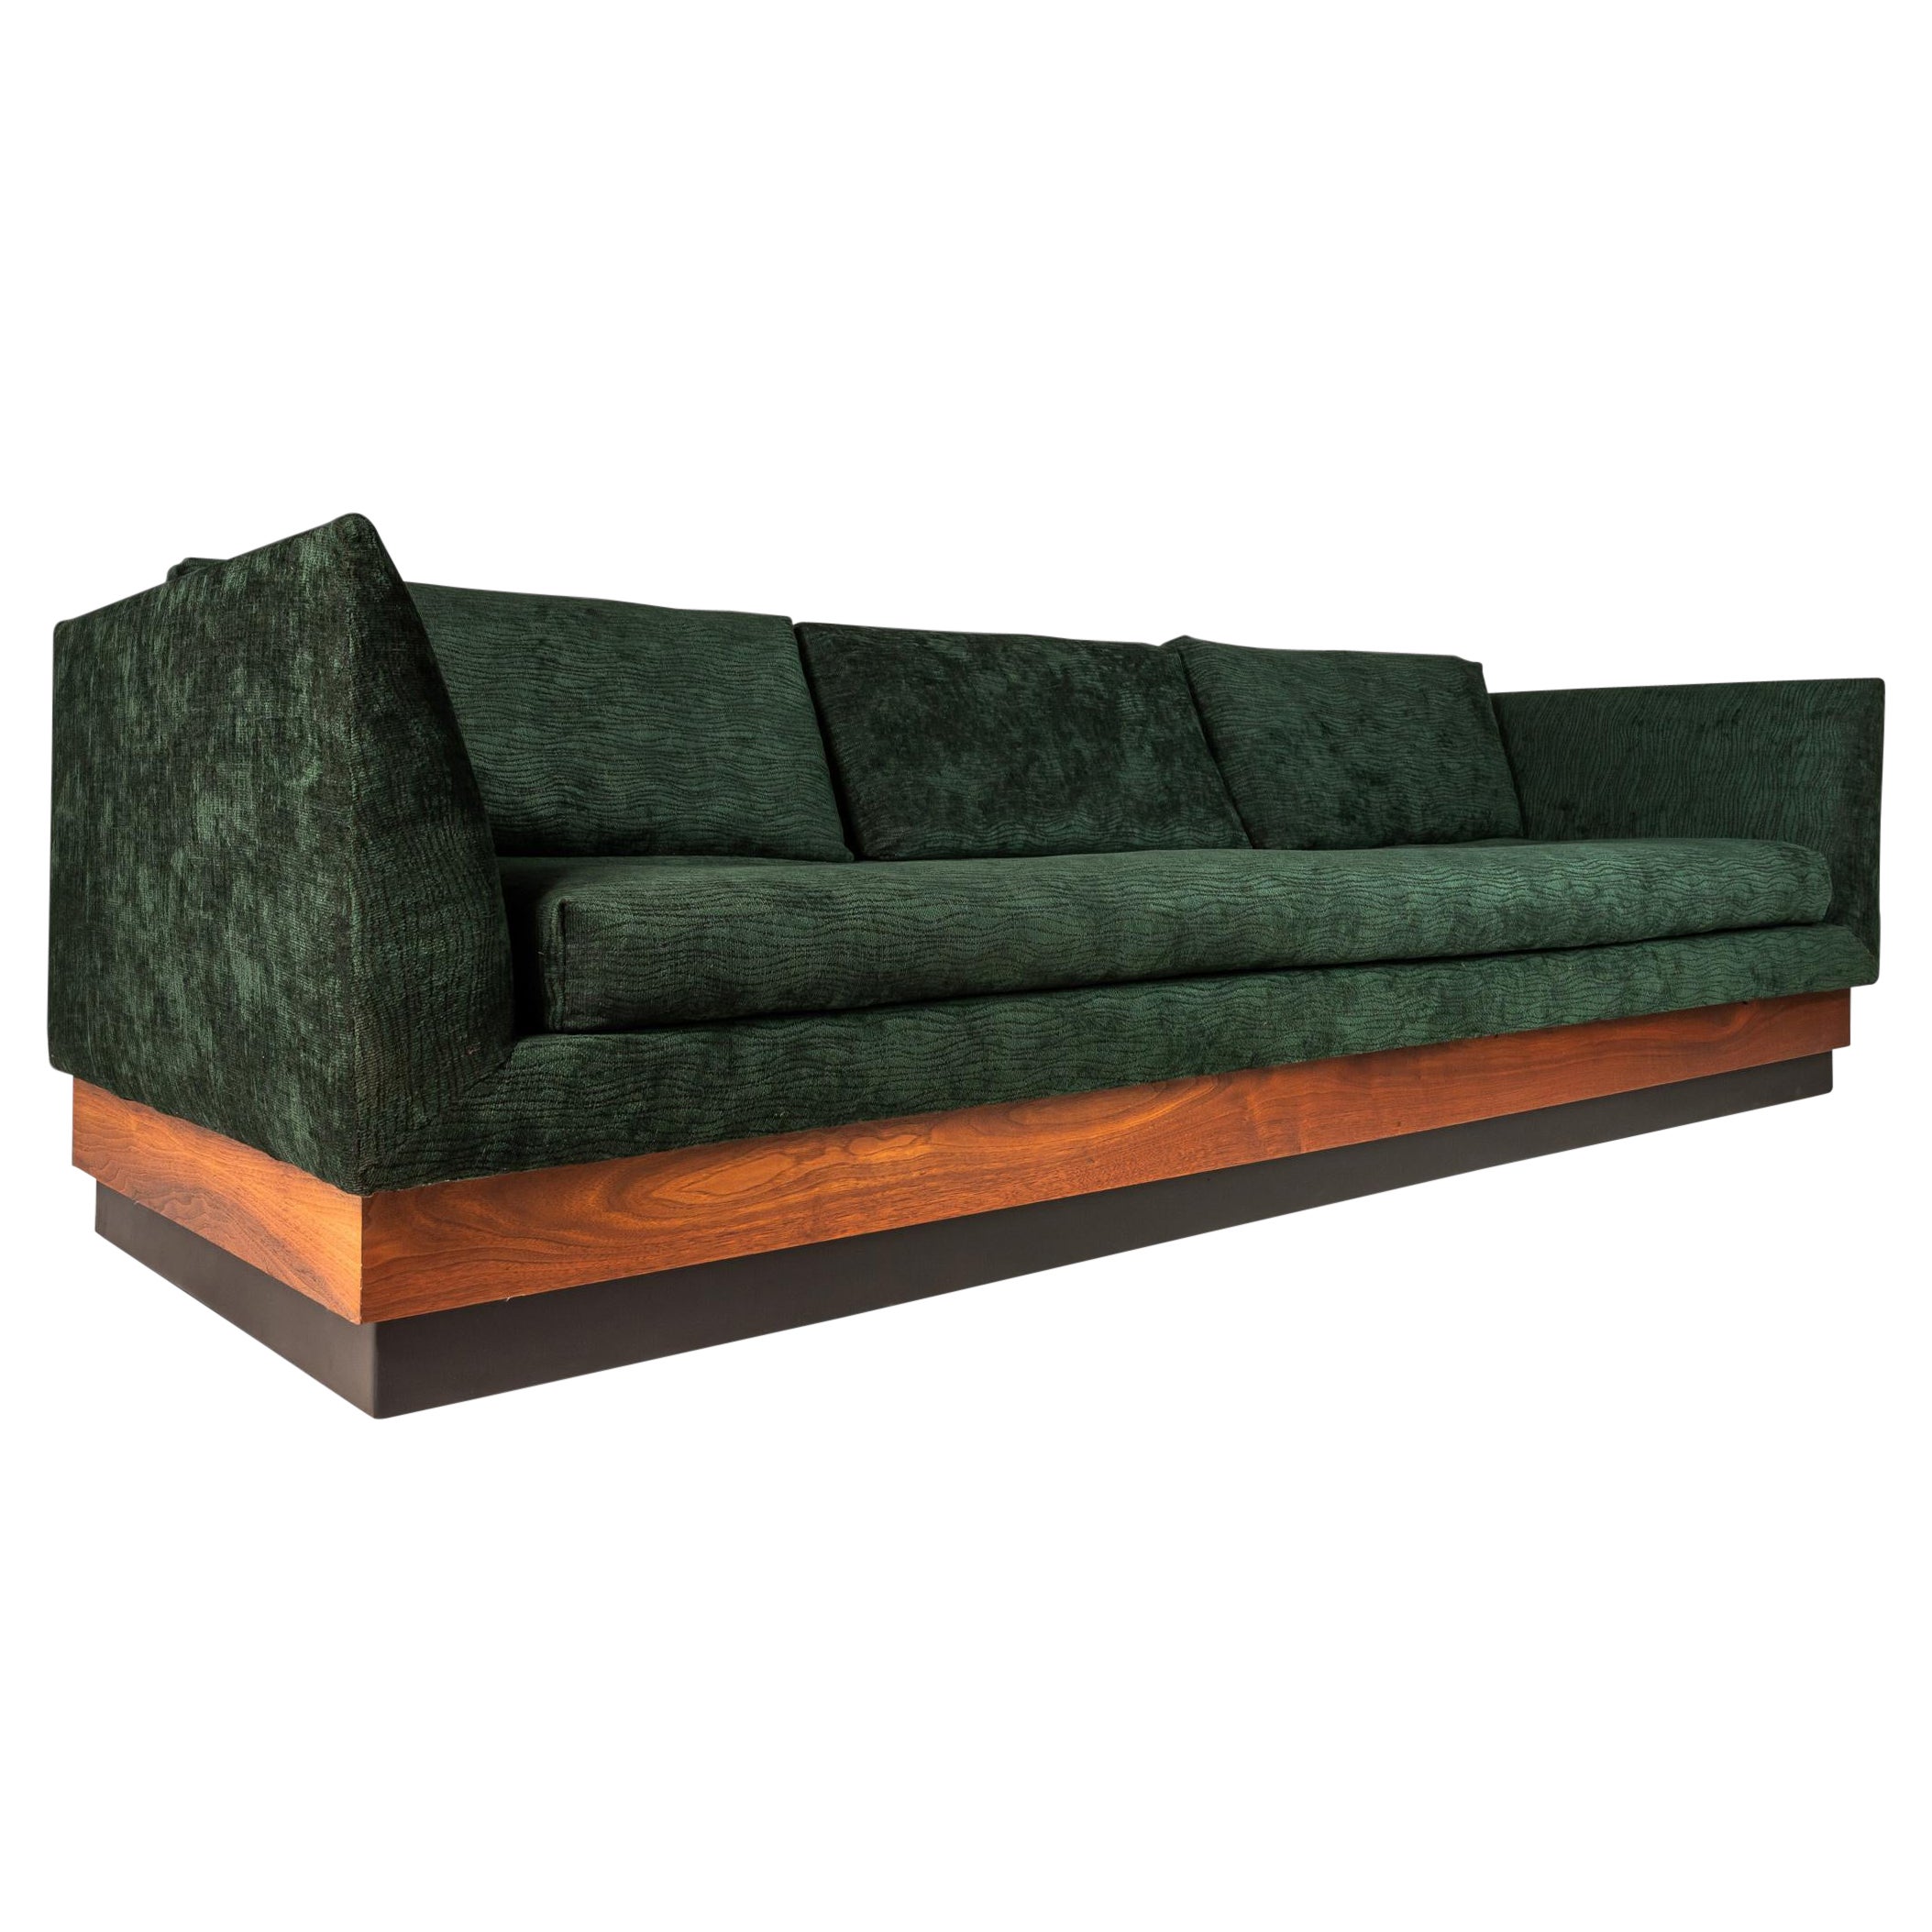 MCM Platform Sofa in Walnut by Adrian Pearsall for Craft Associates, c. 1960's